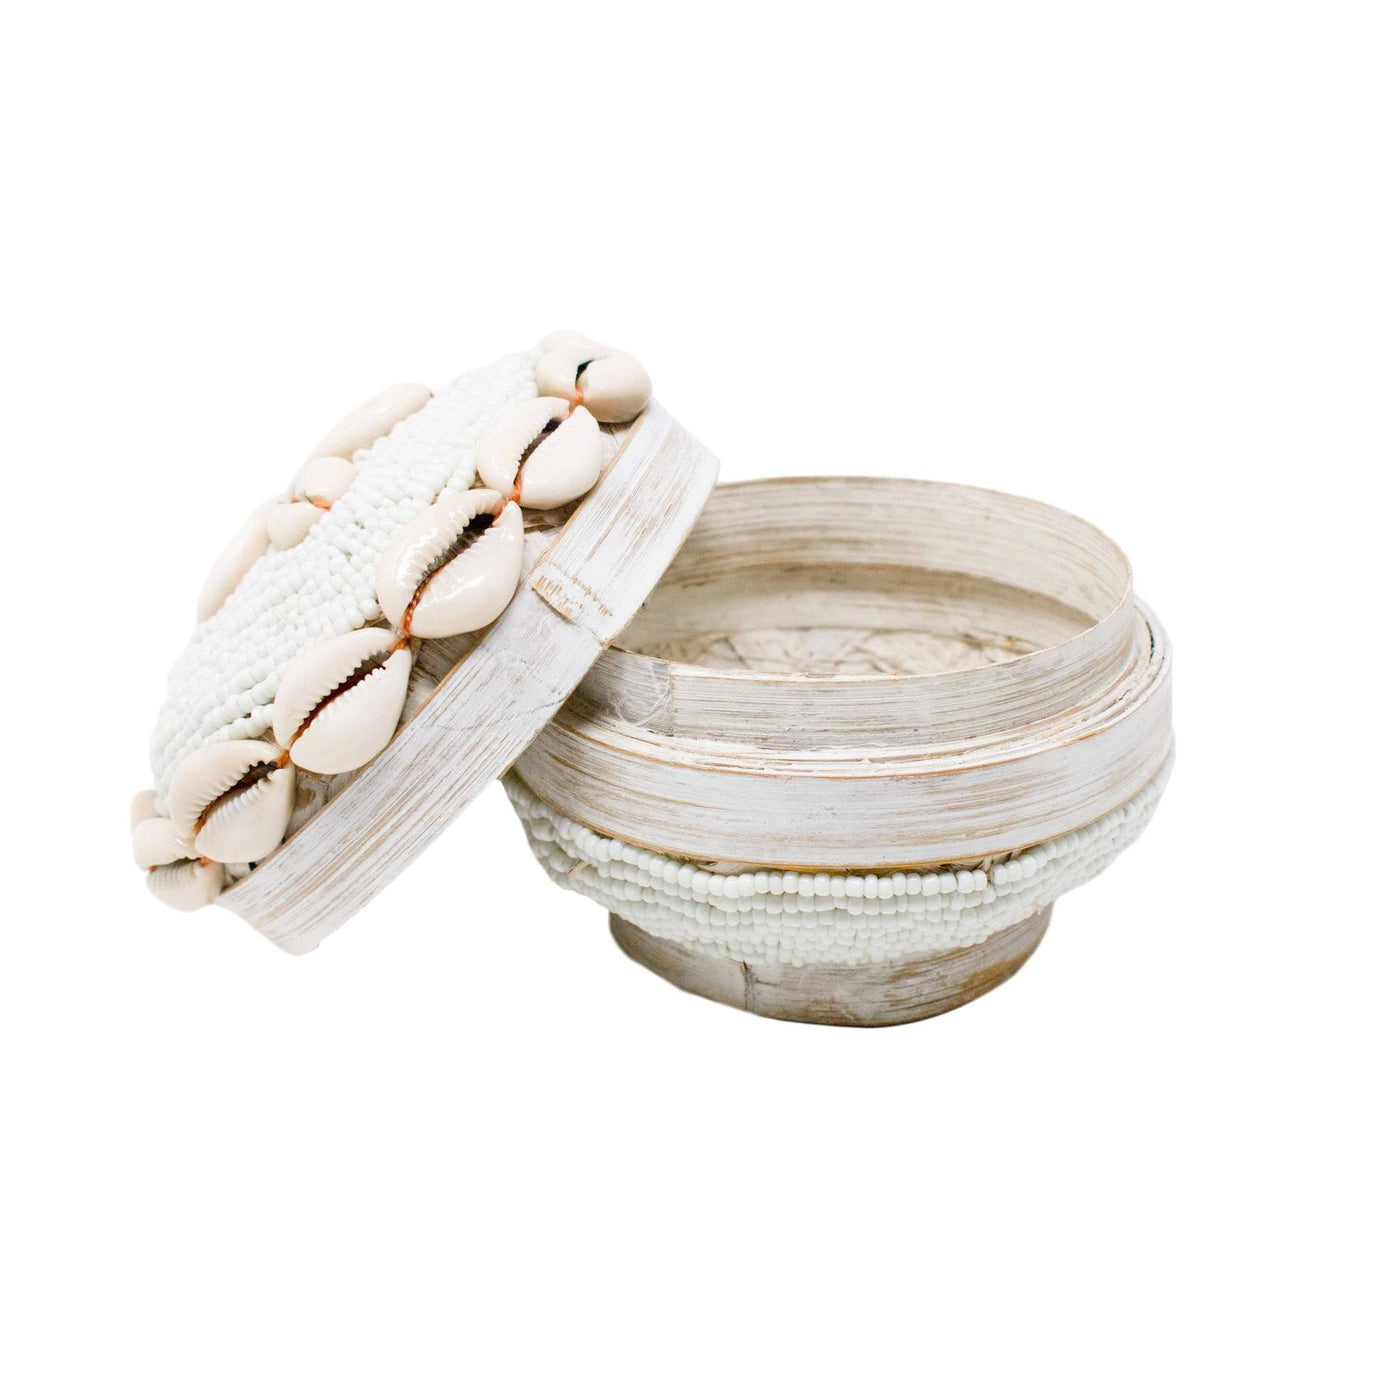 Gili Shell Bowl with Lid - White by POPPY + SAGE